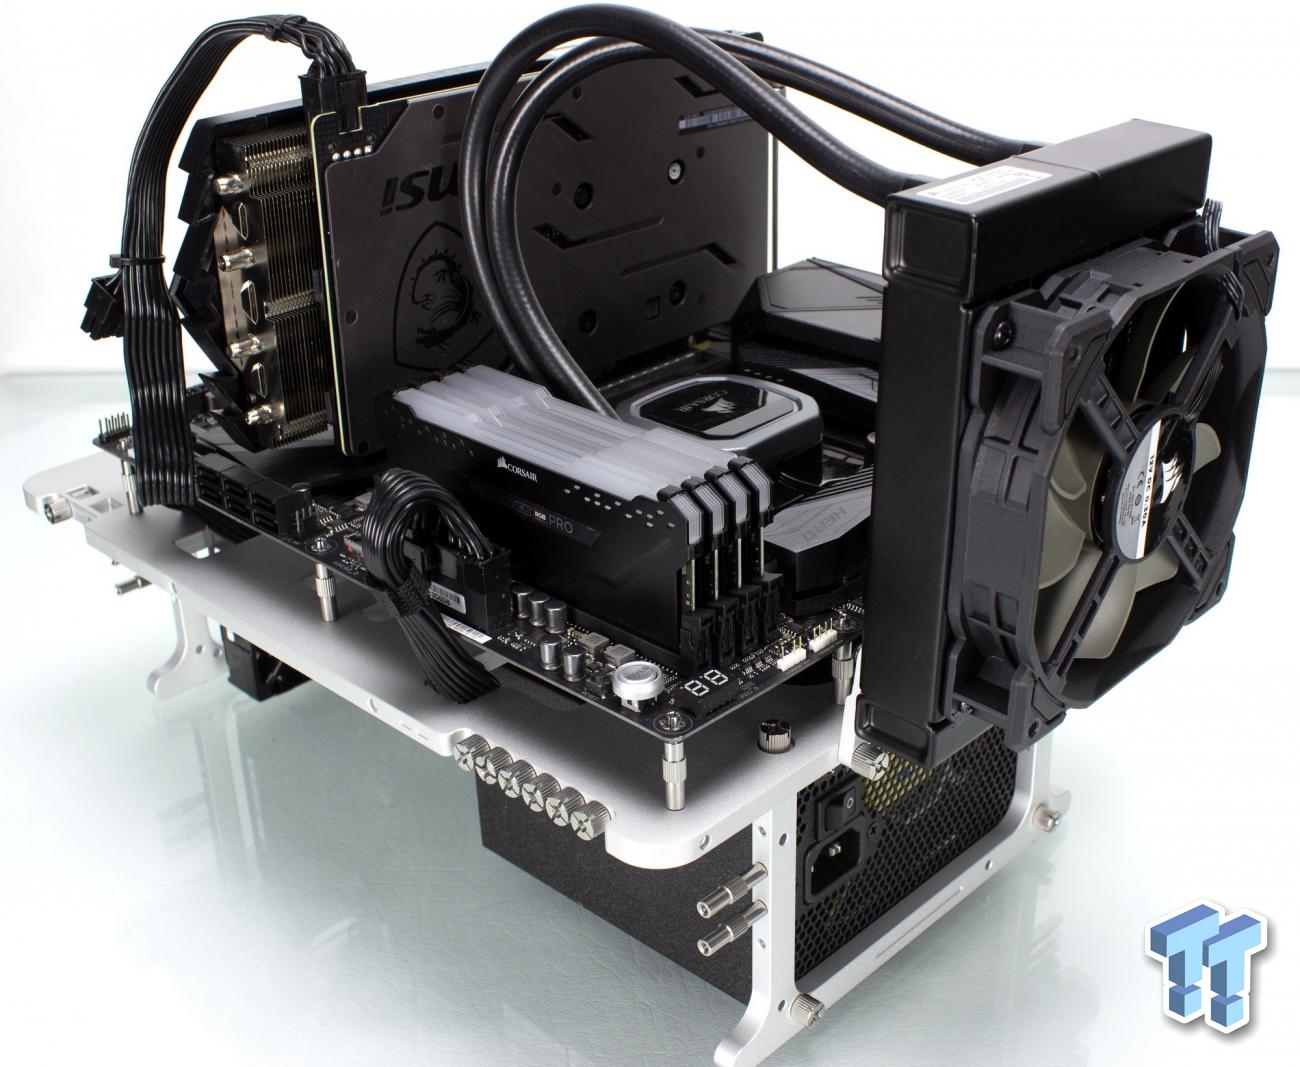 Streacom BC1 Open Air Chassis Review